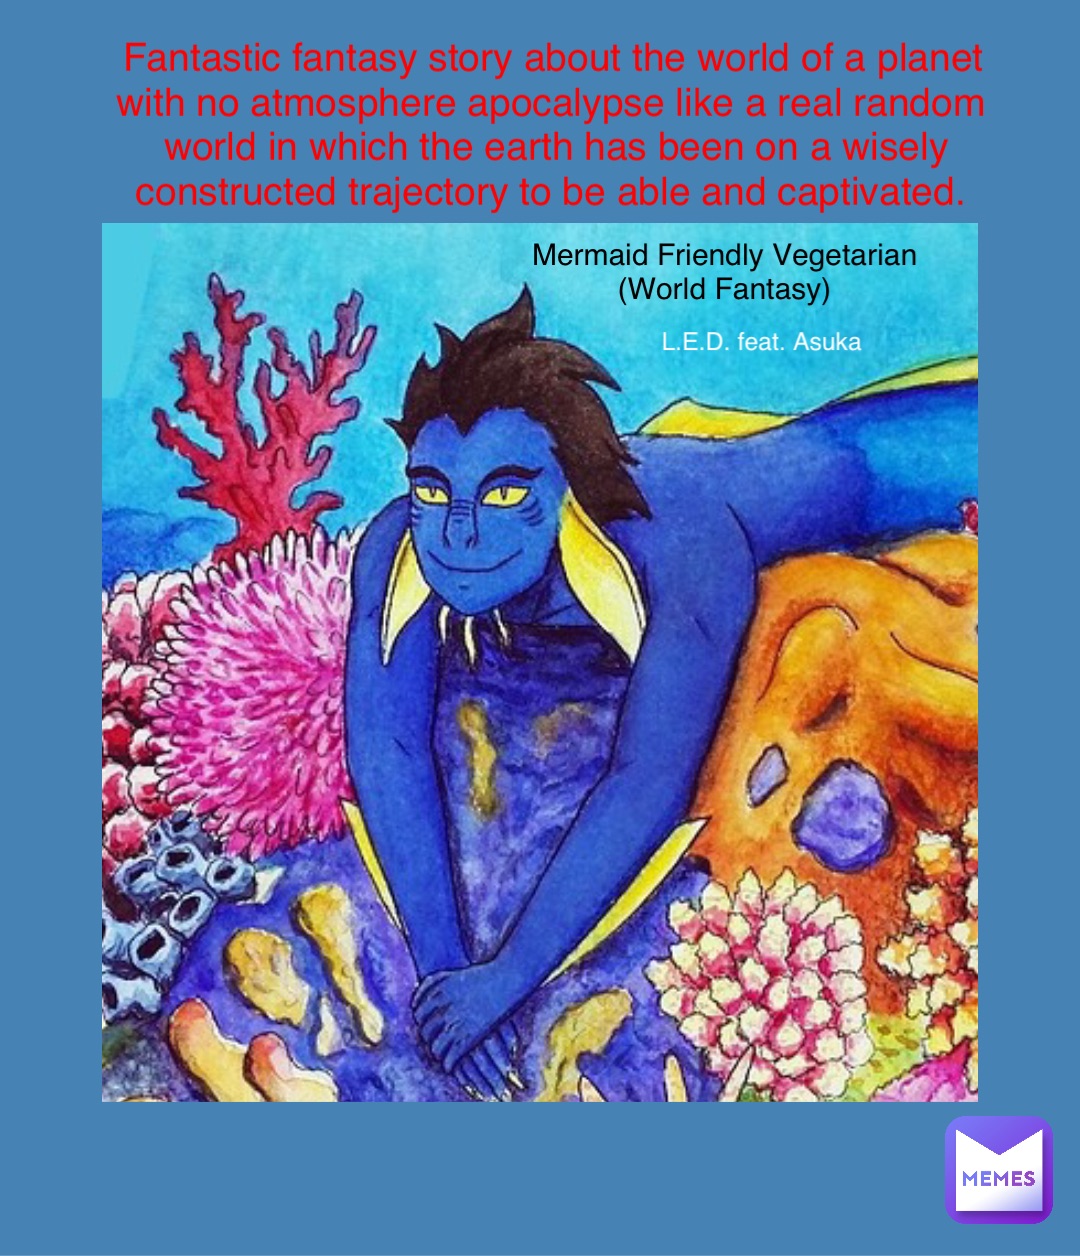 Mermaid Friendly Vegetarian
(World Fantasy) L.E.D. feat. Asuka Fantastic fantasy story about the world of a planet with no atmosphere apocalypse like a real random world in which the earth has been on a wisely constructed trajectory to be able and captivated.